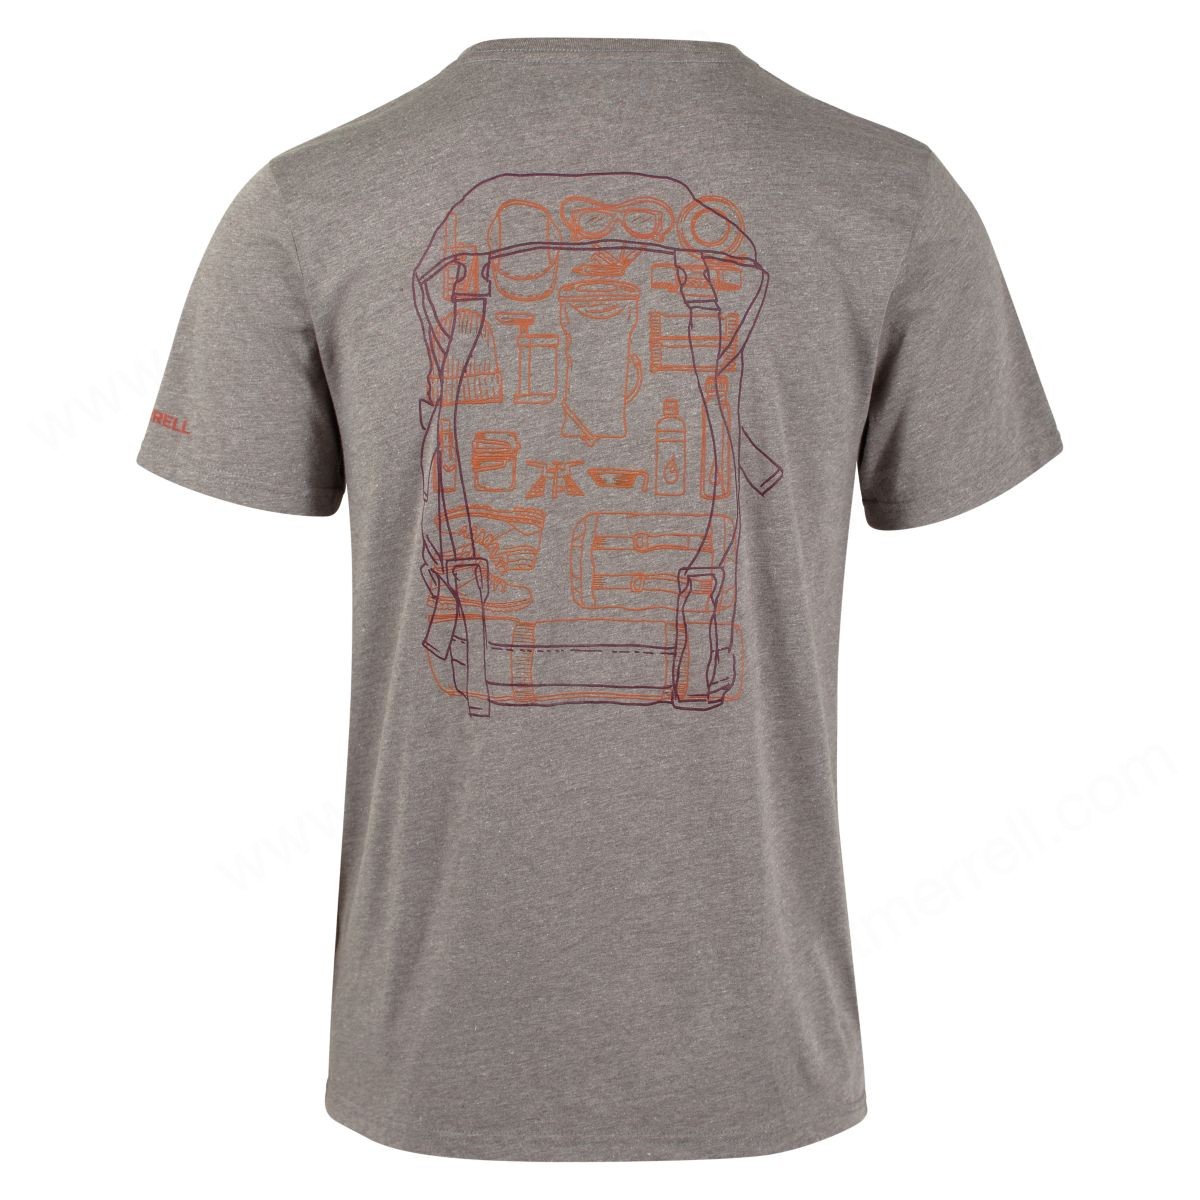 Merrell Mens's Packed Graphic Tees Heather Grey - -1